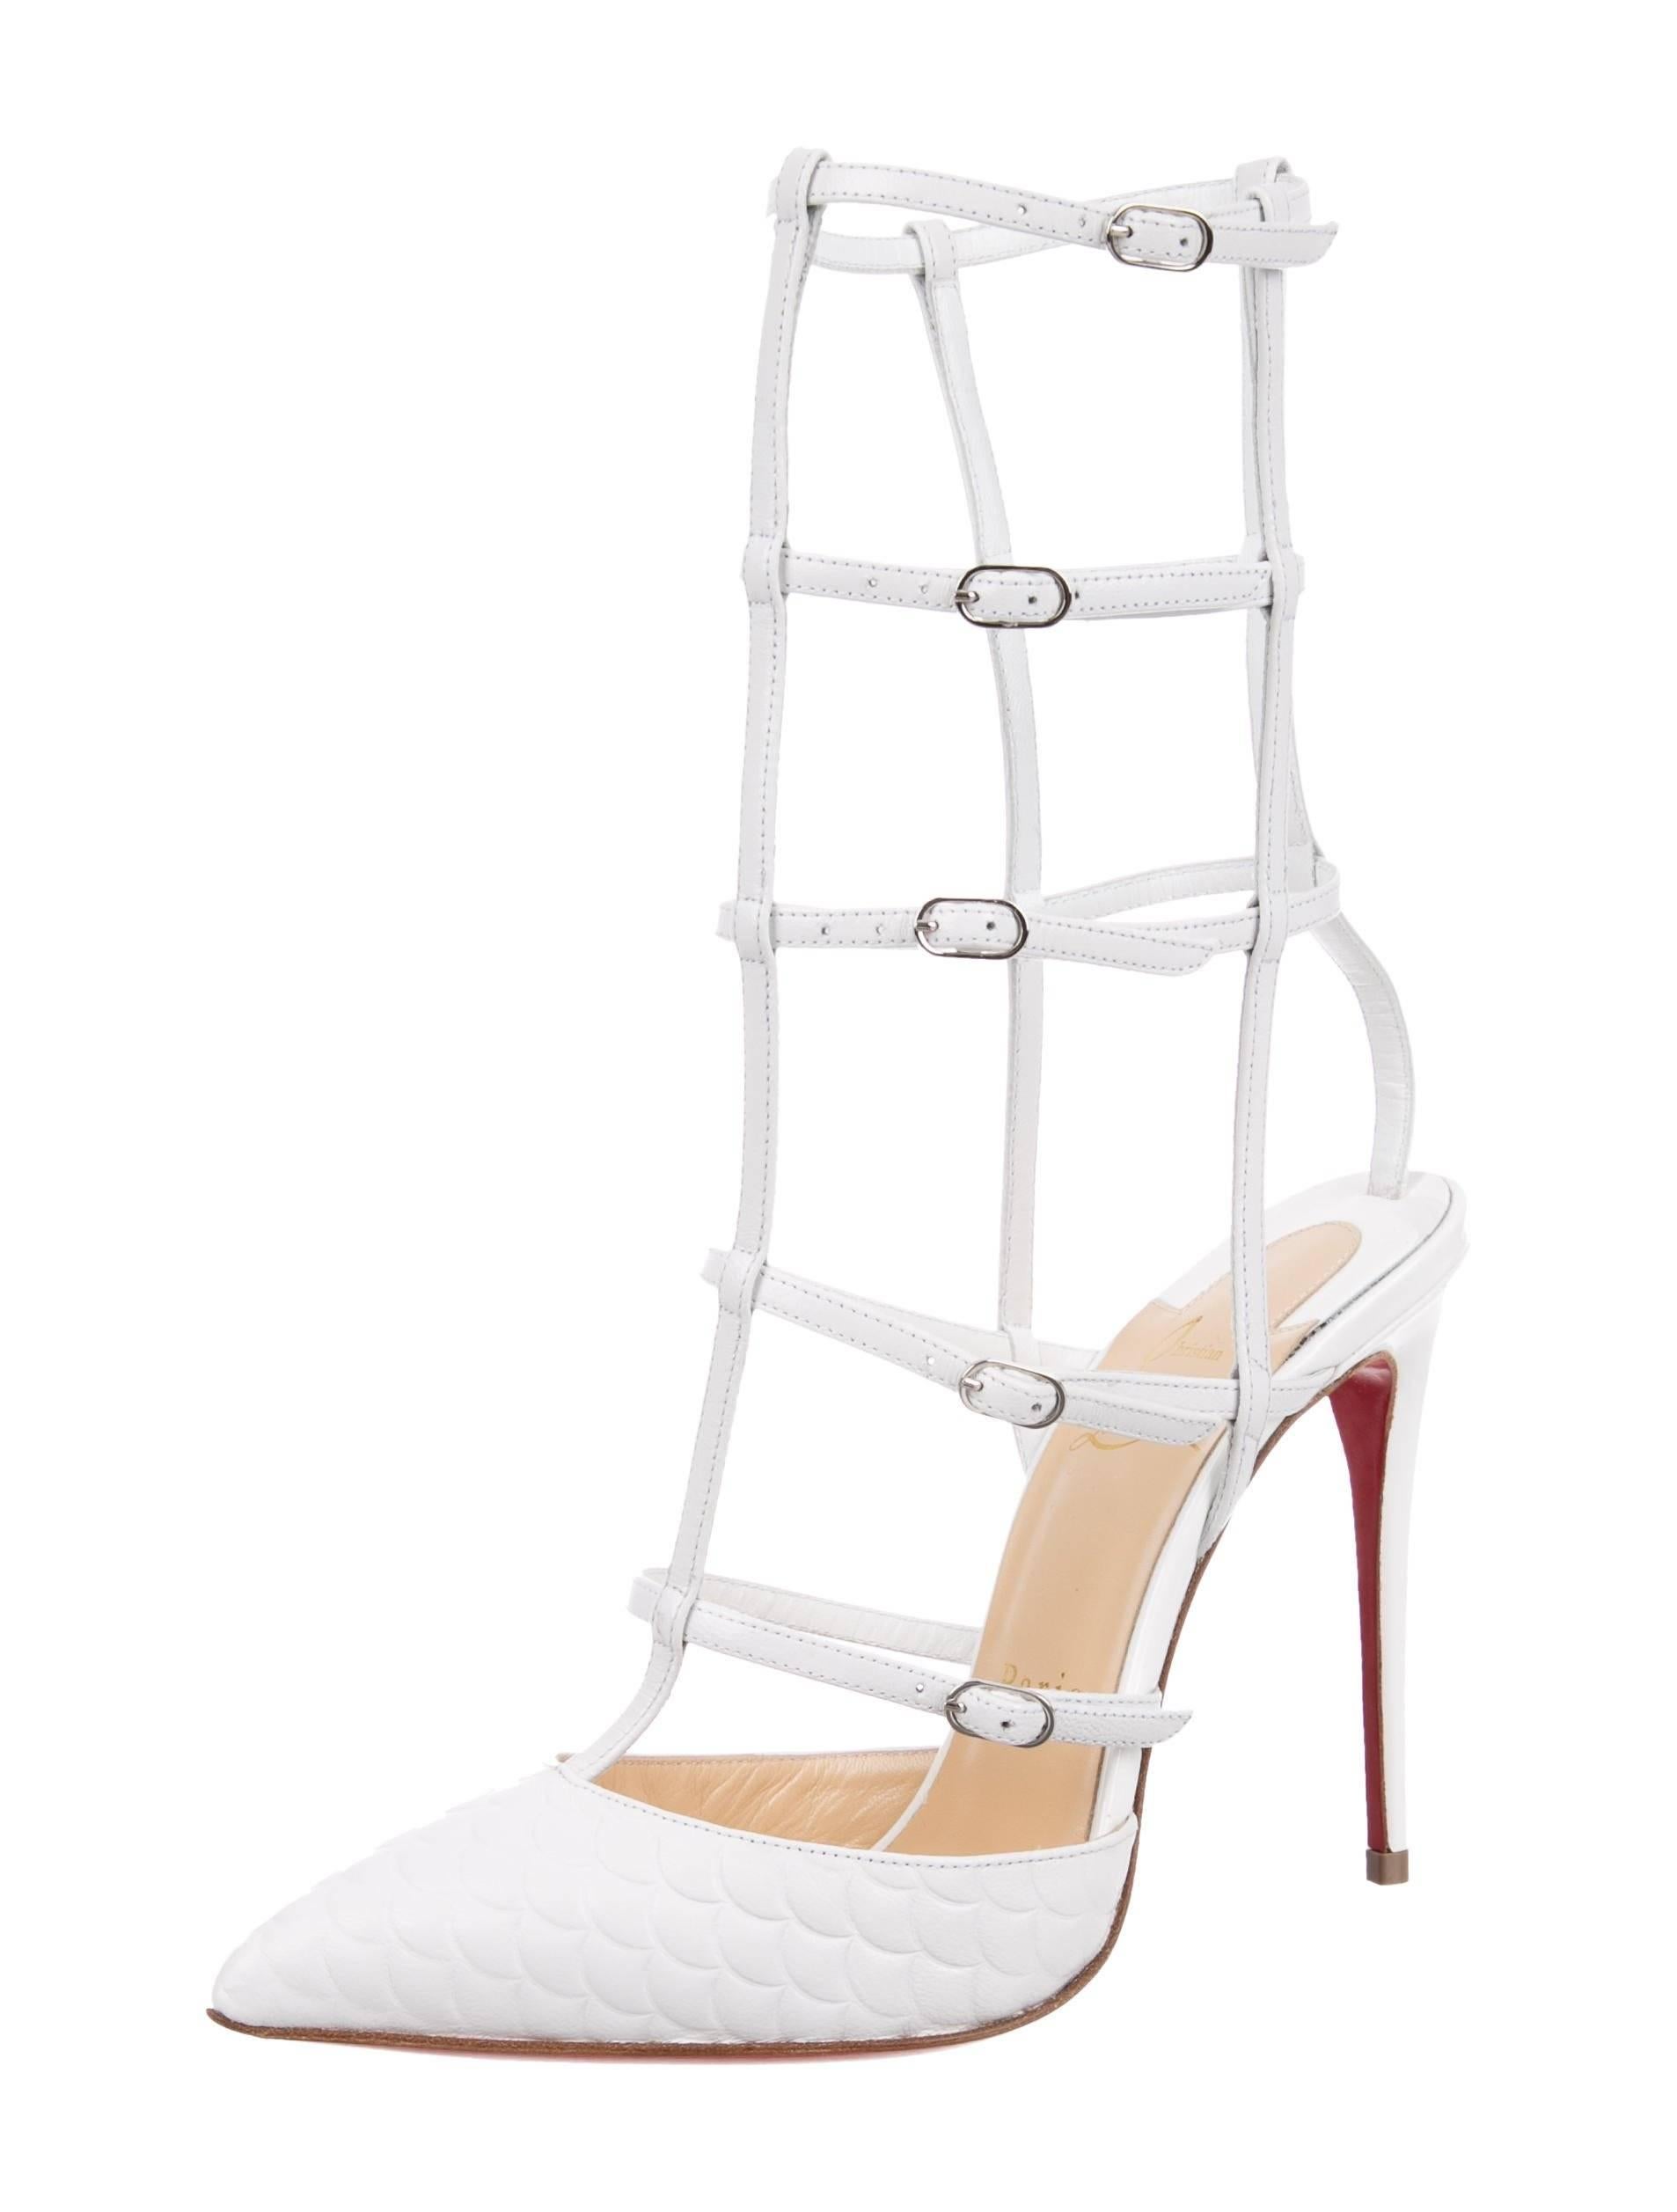 Christian Louboutin NEW White Leather Cage Evening Sandals Heels Pumps in Box

Size IT 36.5
Leather
Silver tone hardware
Ankle buckle closure
Made in Italy
Heel height 4.25